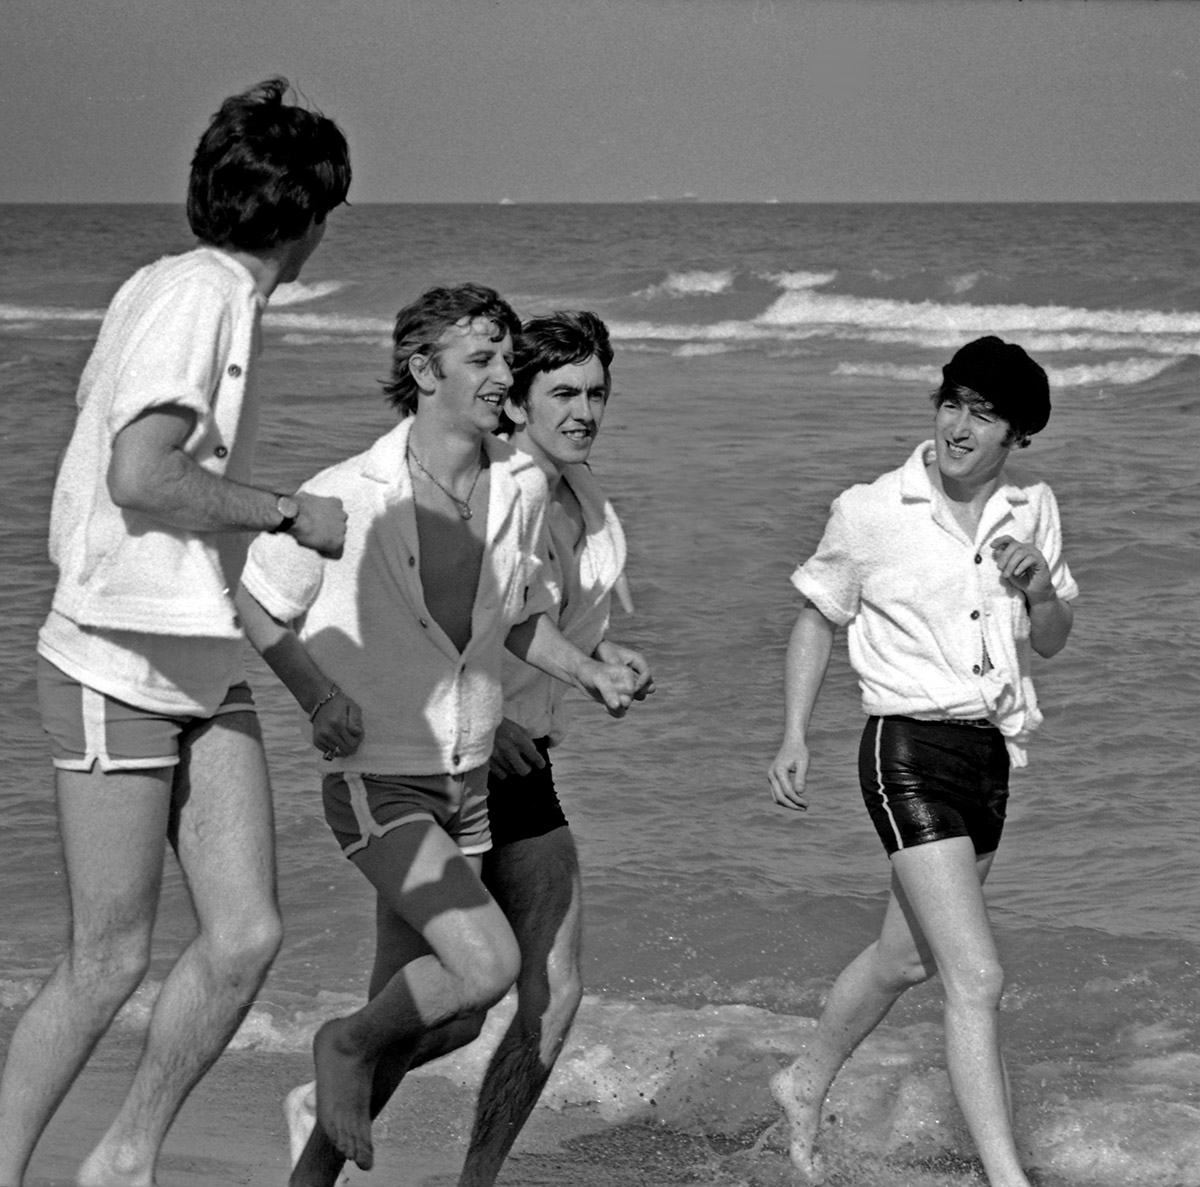 The Beatles running on the beach in Miami, Florida, February 1964.